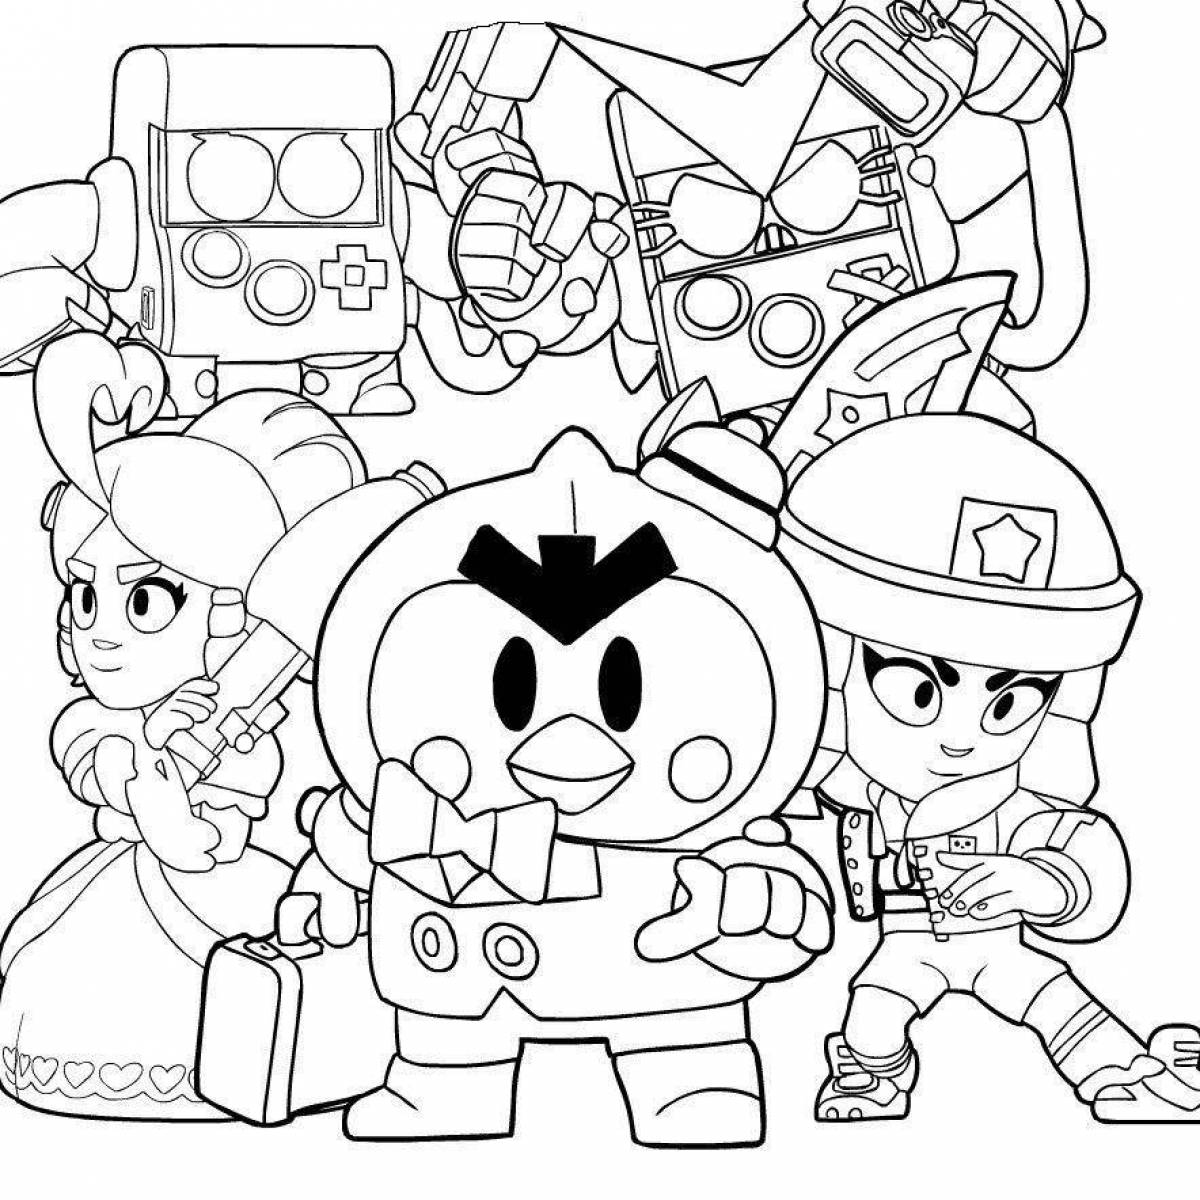 Shiny blue stars coloring page